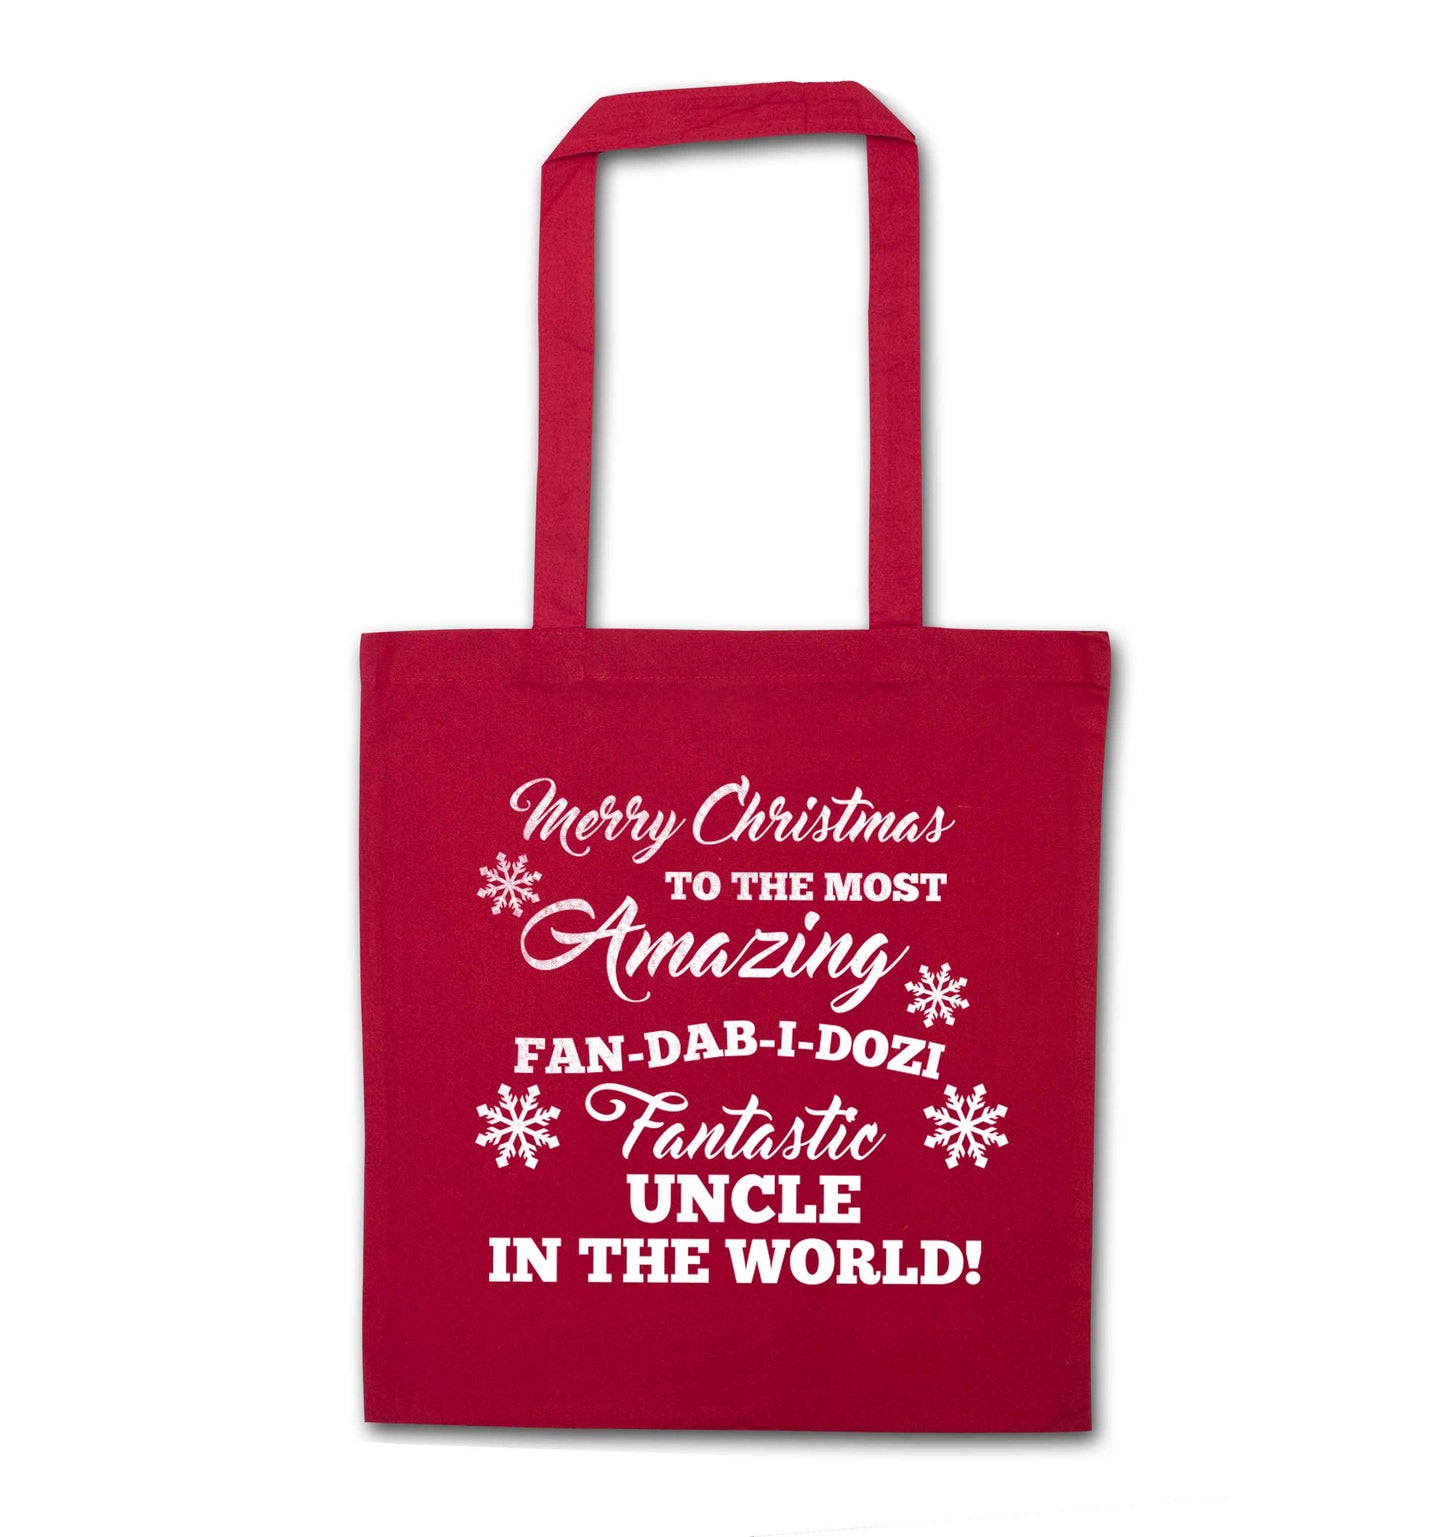 Merry Christmas to the most amazing fan-dab-i-dozi fantasic Uncle in the world red tote bag